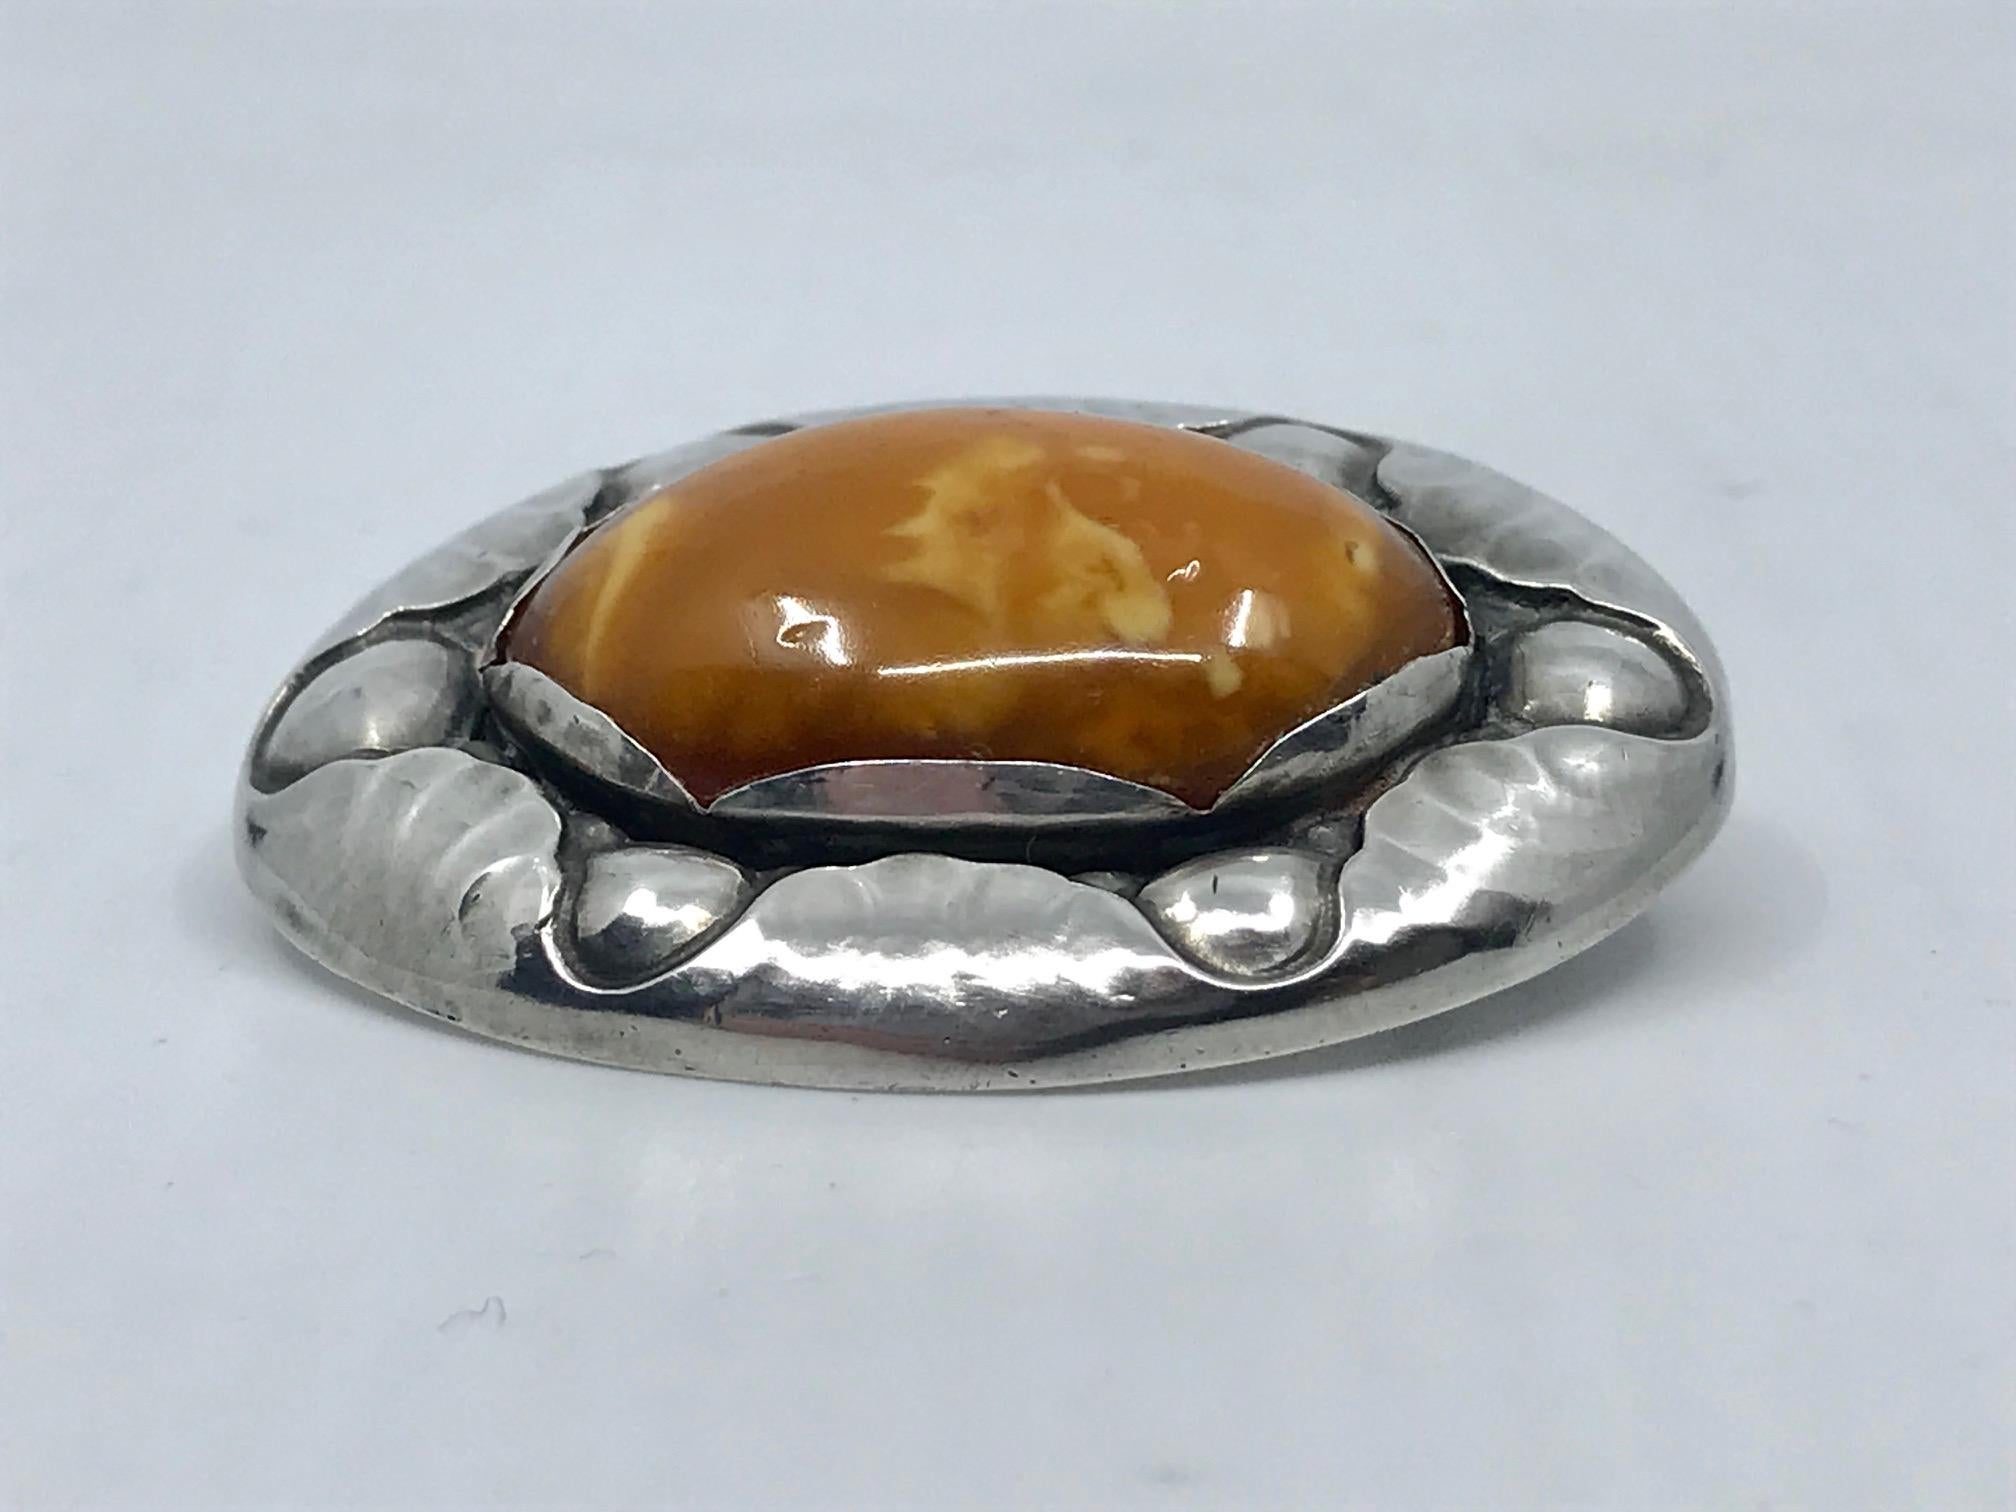 Rare vintage silver Georg Jensen brooch with a large oval amber stone, design #119 by Georg Jensen from circa 1913.
Measures 2 1/8 x 1 5/8″ (5.5cm x 4.2cm).
Vintage Georg Jensen hallmarks from 1915-1919, 830s.